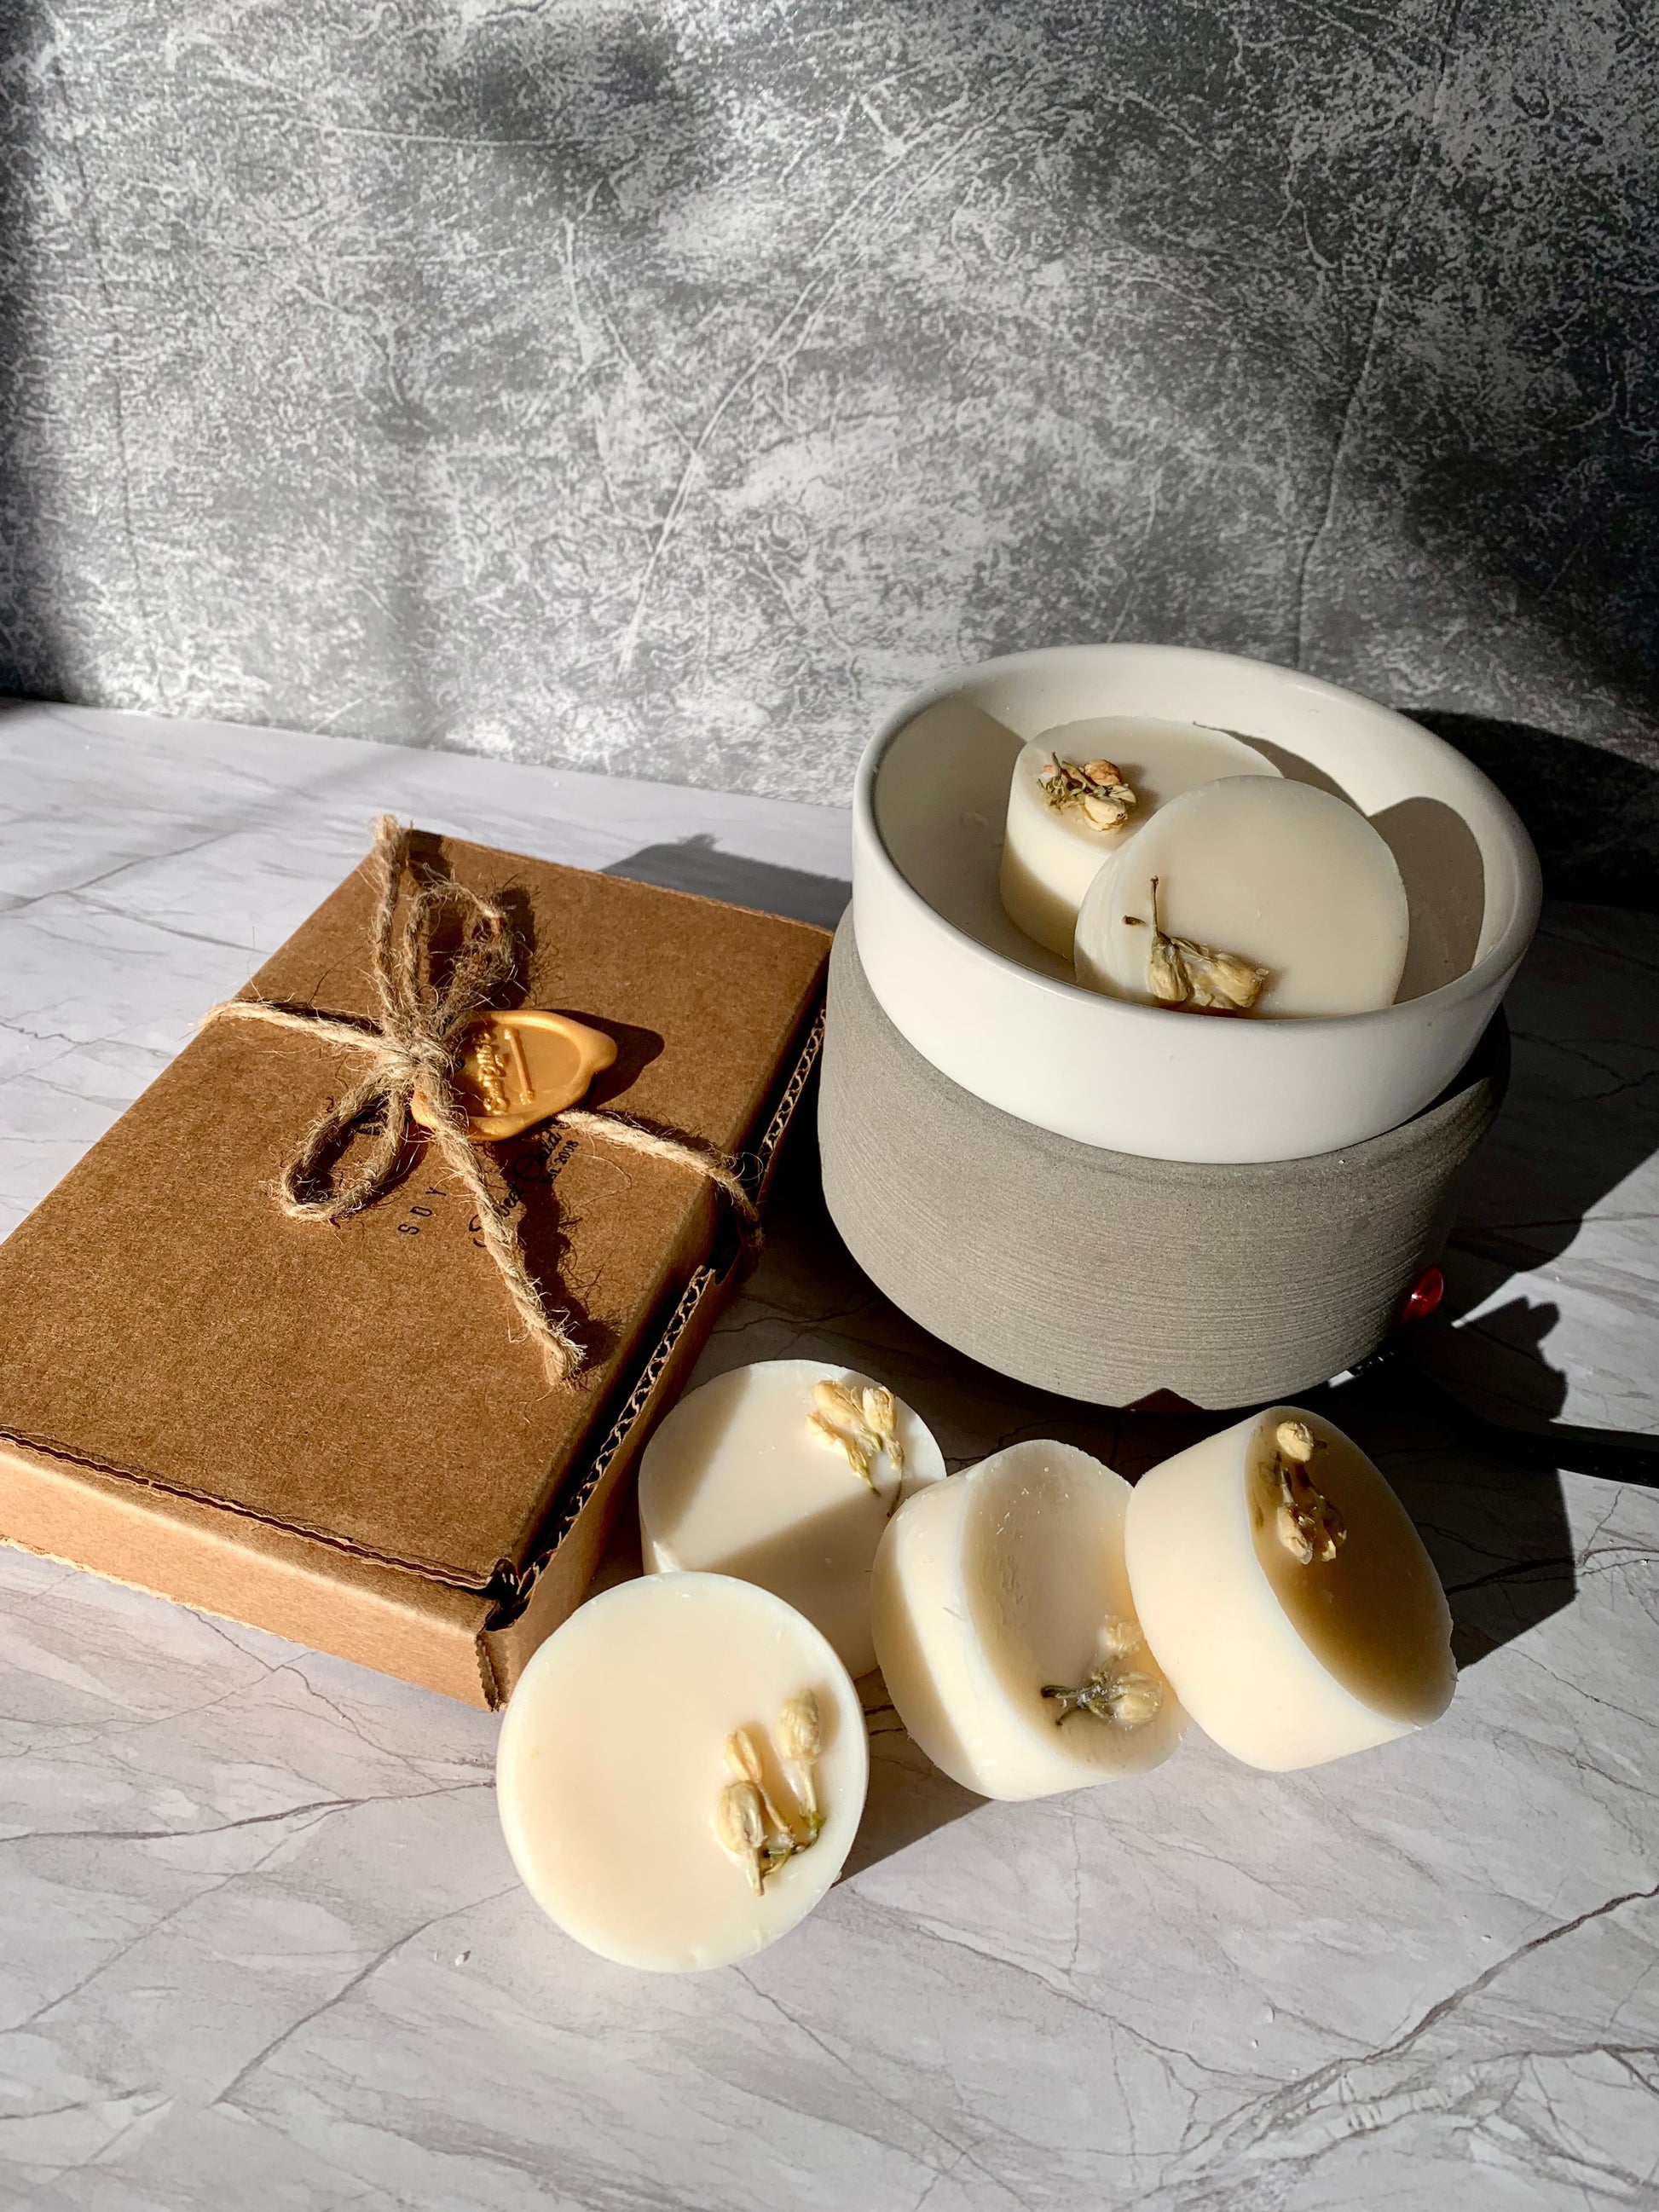 Soy Wax Melt Pods in a Box